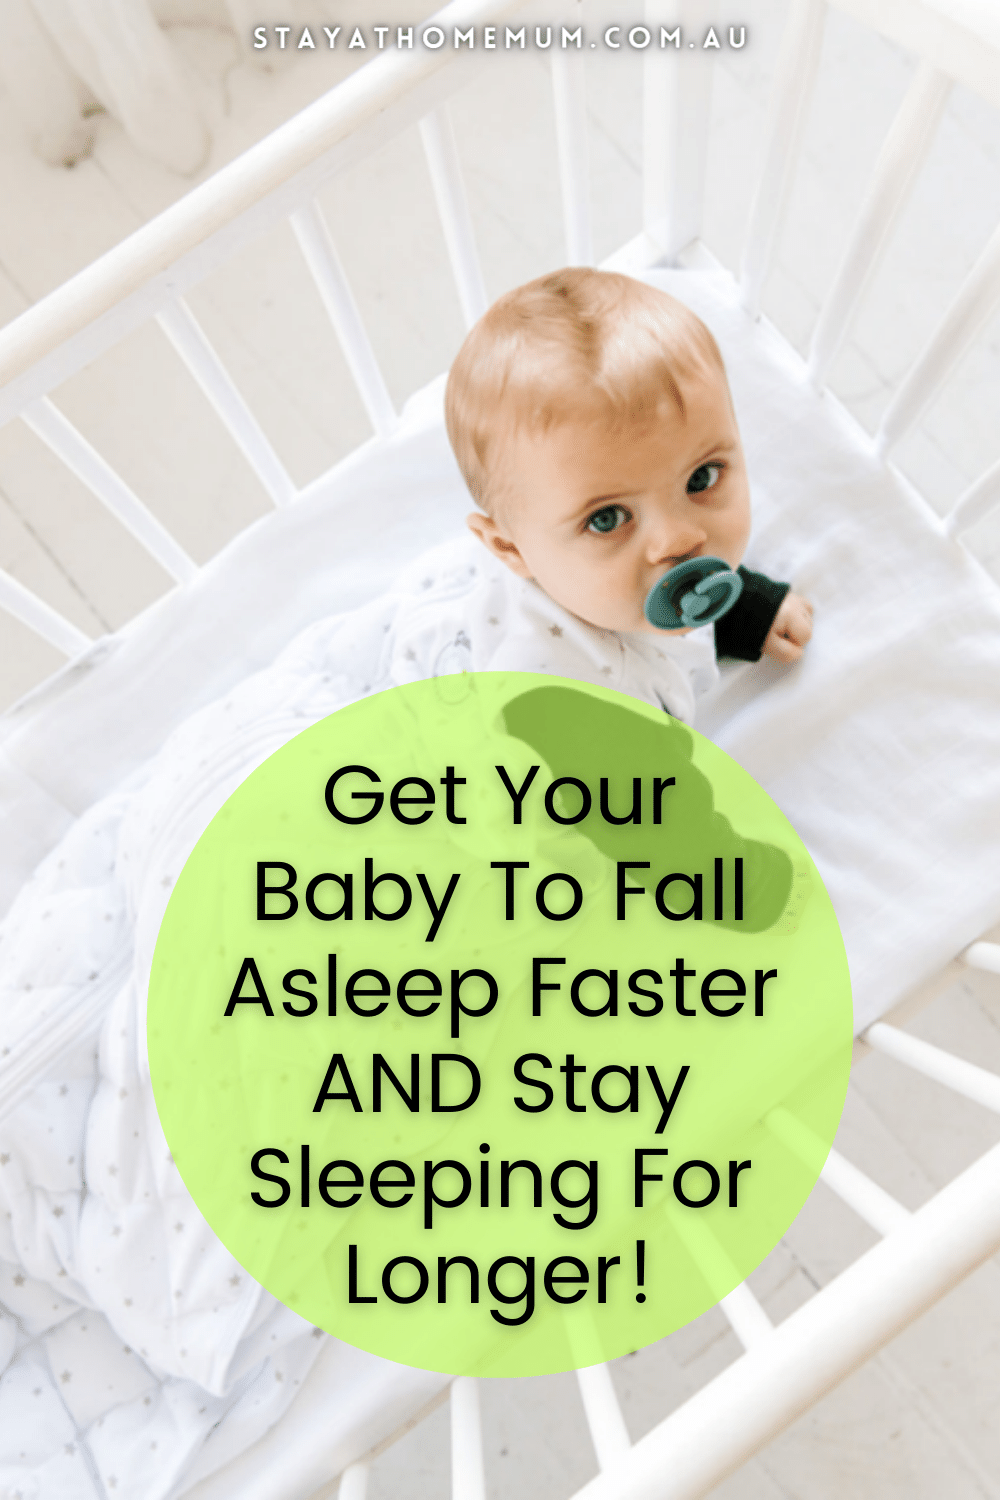 Get Your Baby To Fall Asleep Faster AND Stay Sleeping For Longer | Stay at Home Mum.com.au